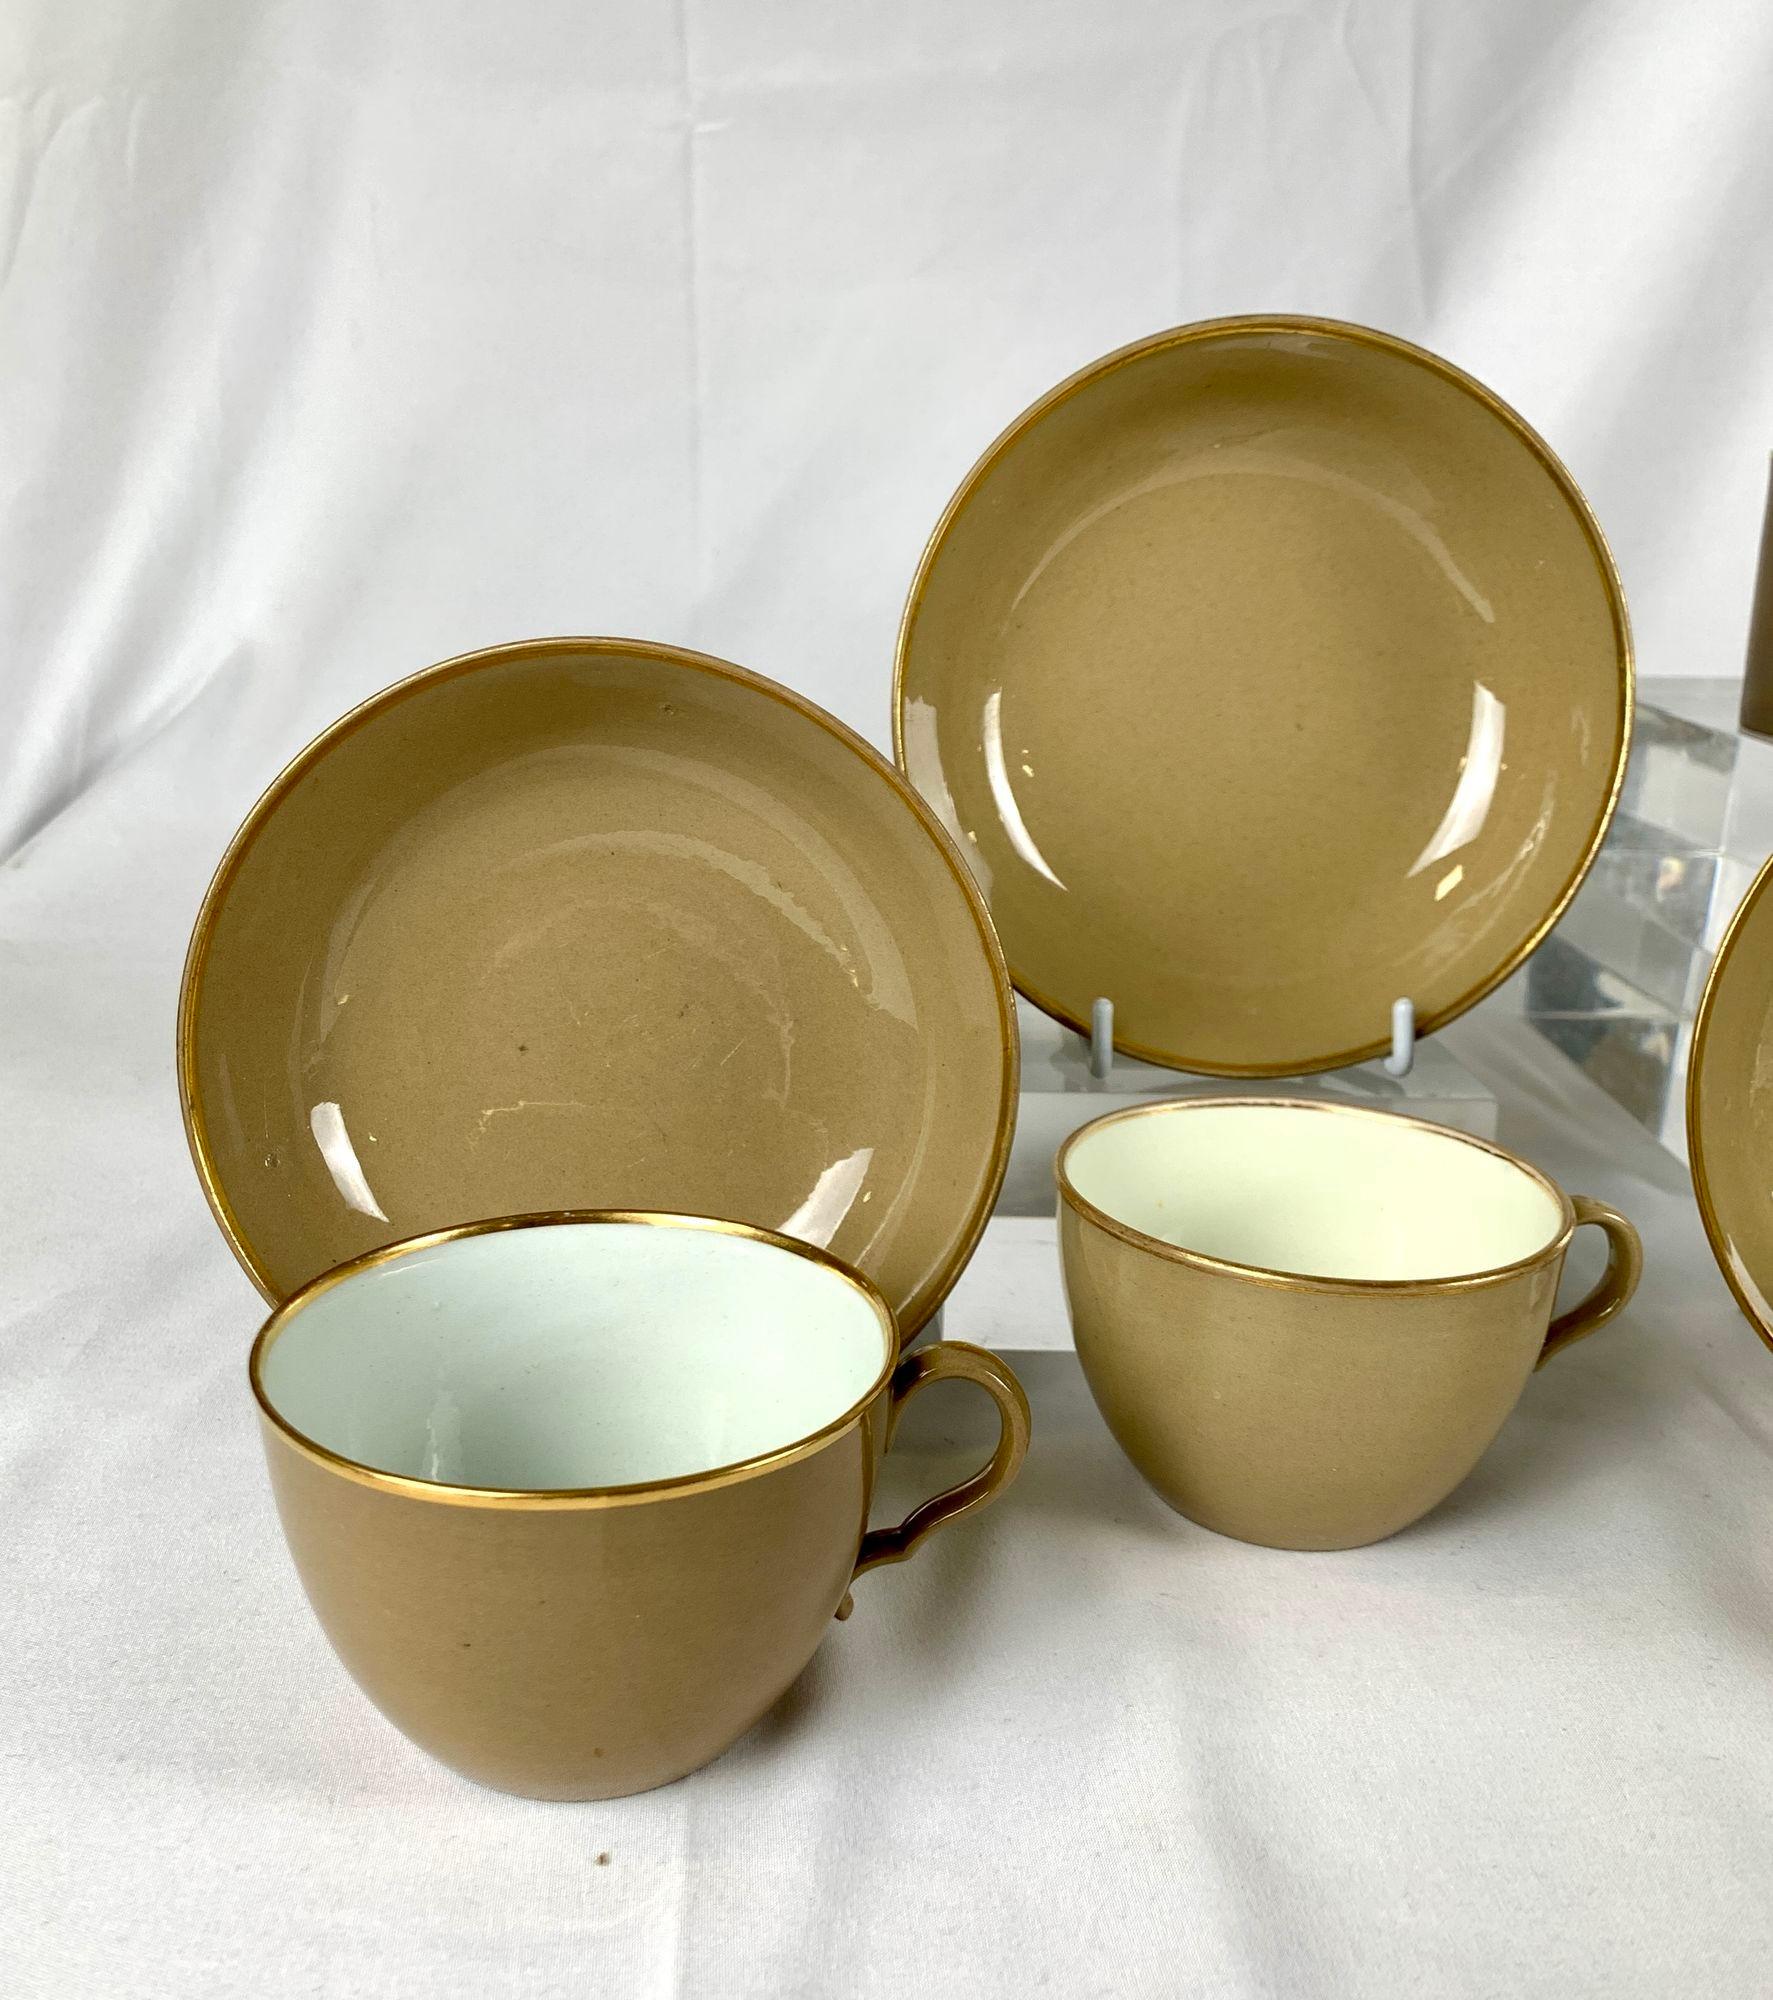 English Antique Drabware Group of Cups and Saucers England Circa 1825